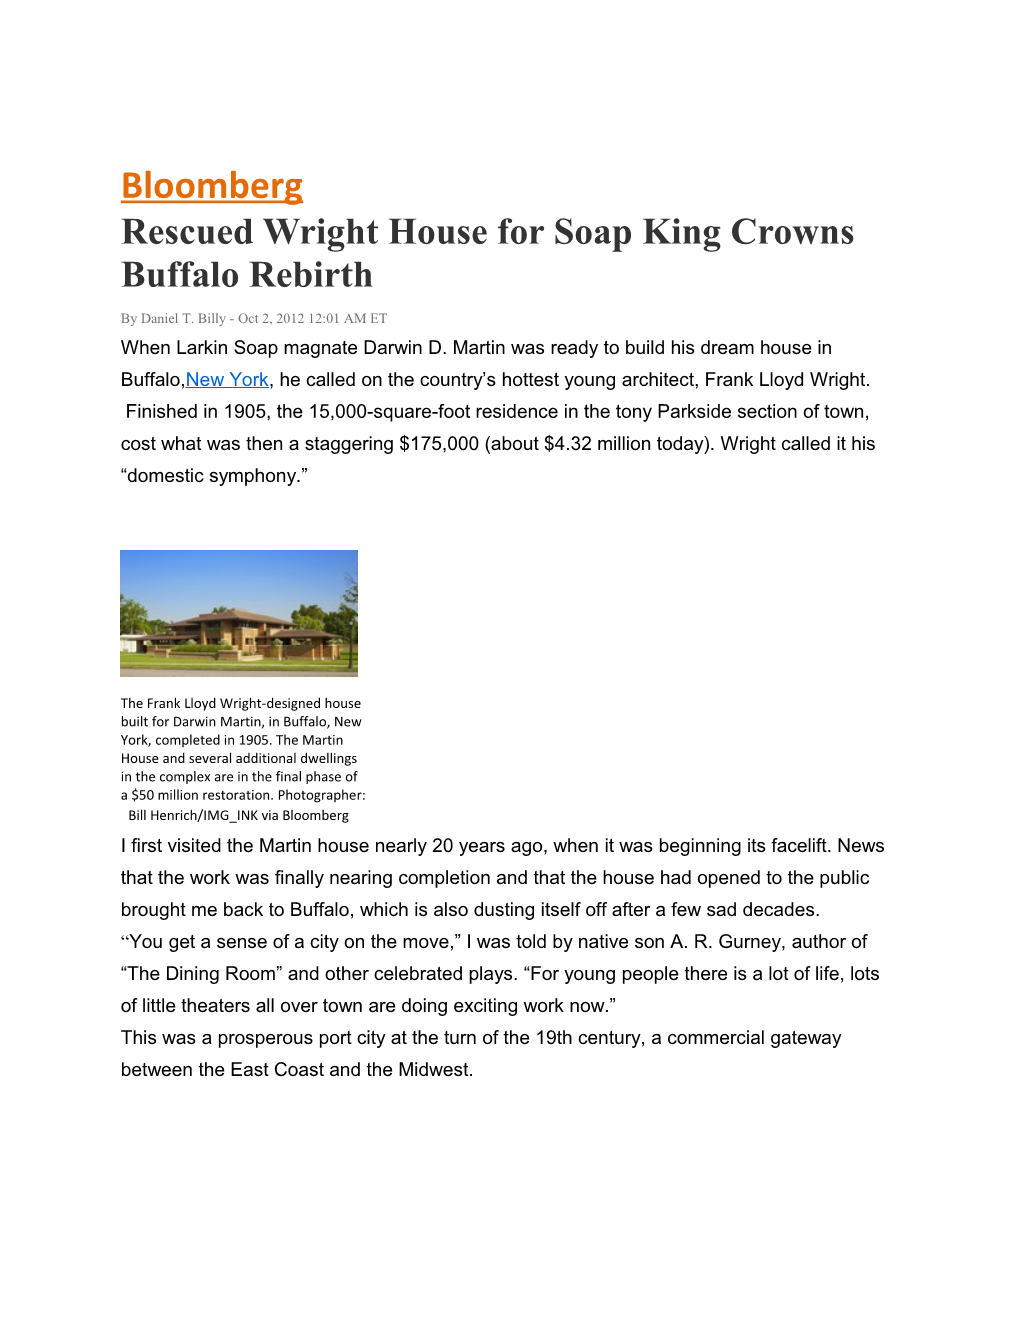 Rescued Wright House for Soap King Crowns Buffalo Rebirth